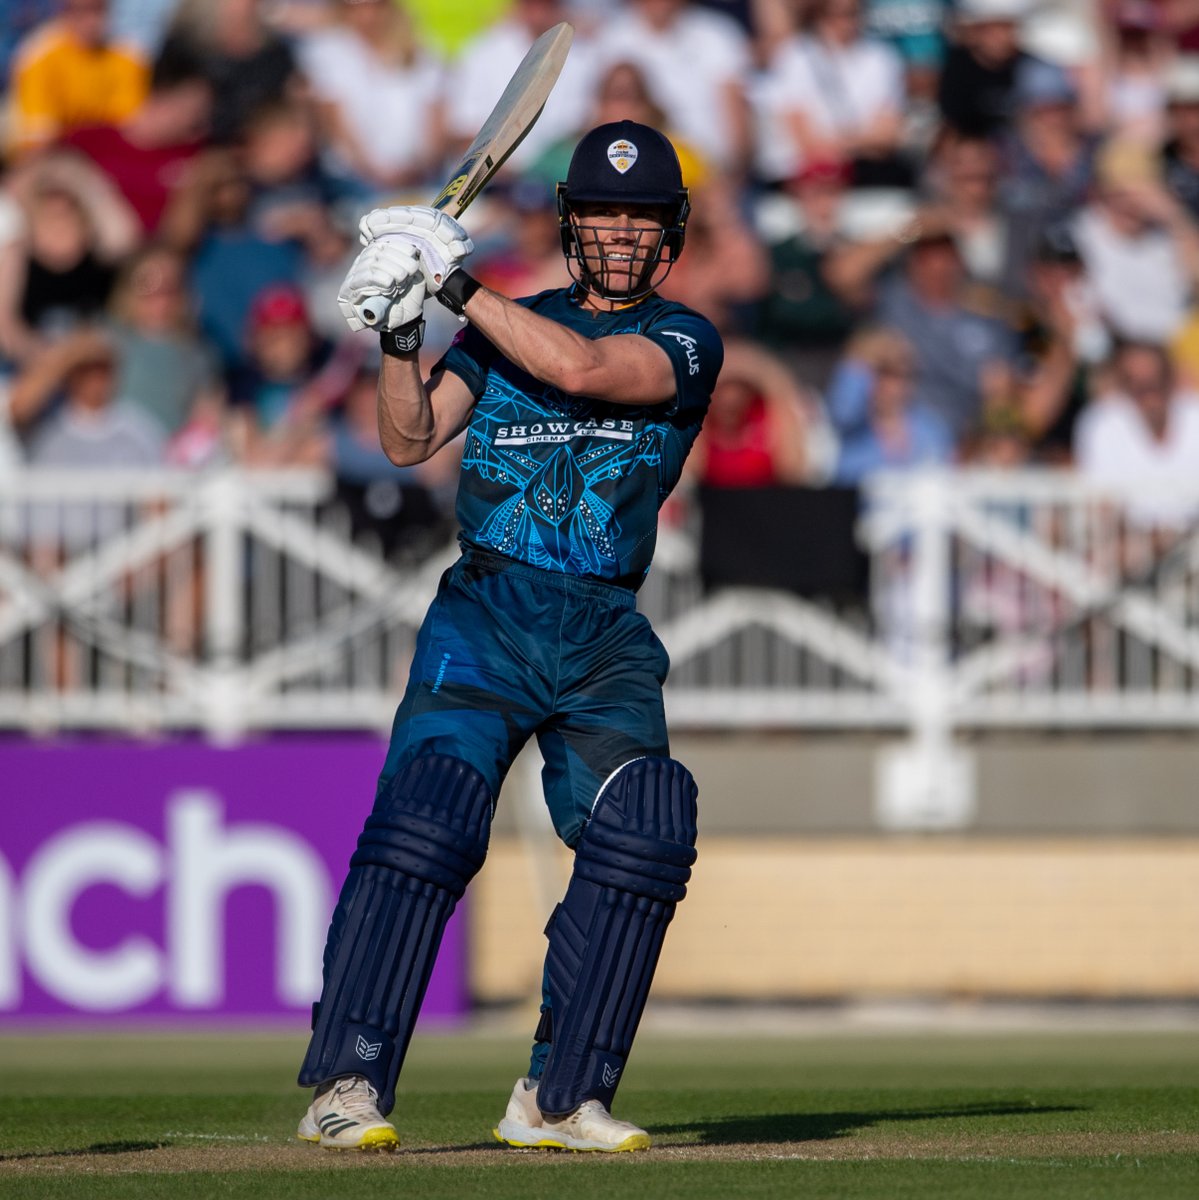 New Contracts Signed! @HarryCame4 and @lreece17 have both signed new two year contracts @DerbyshireCCC extending their stays until the end of the 2025 season...